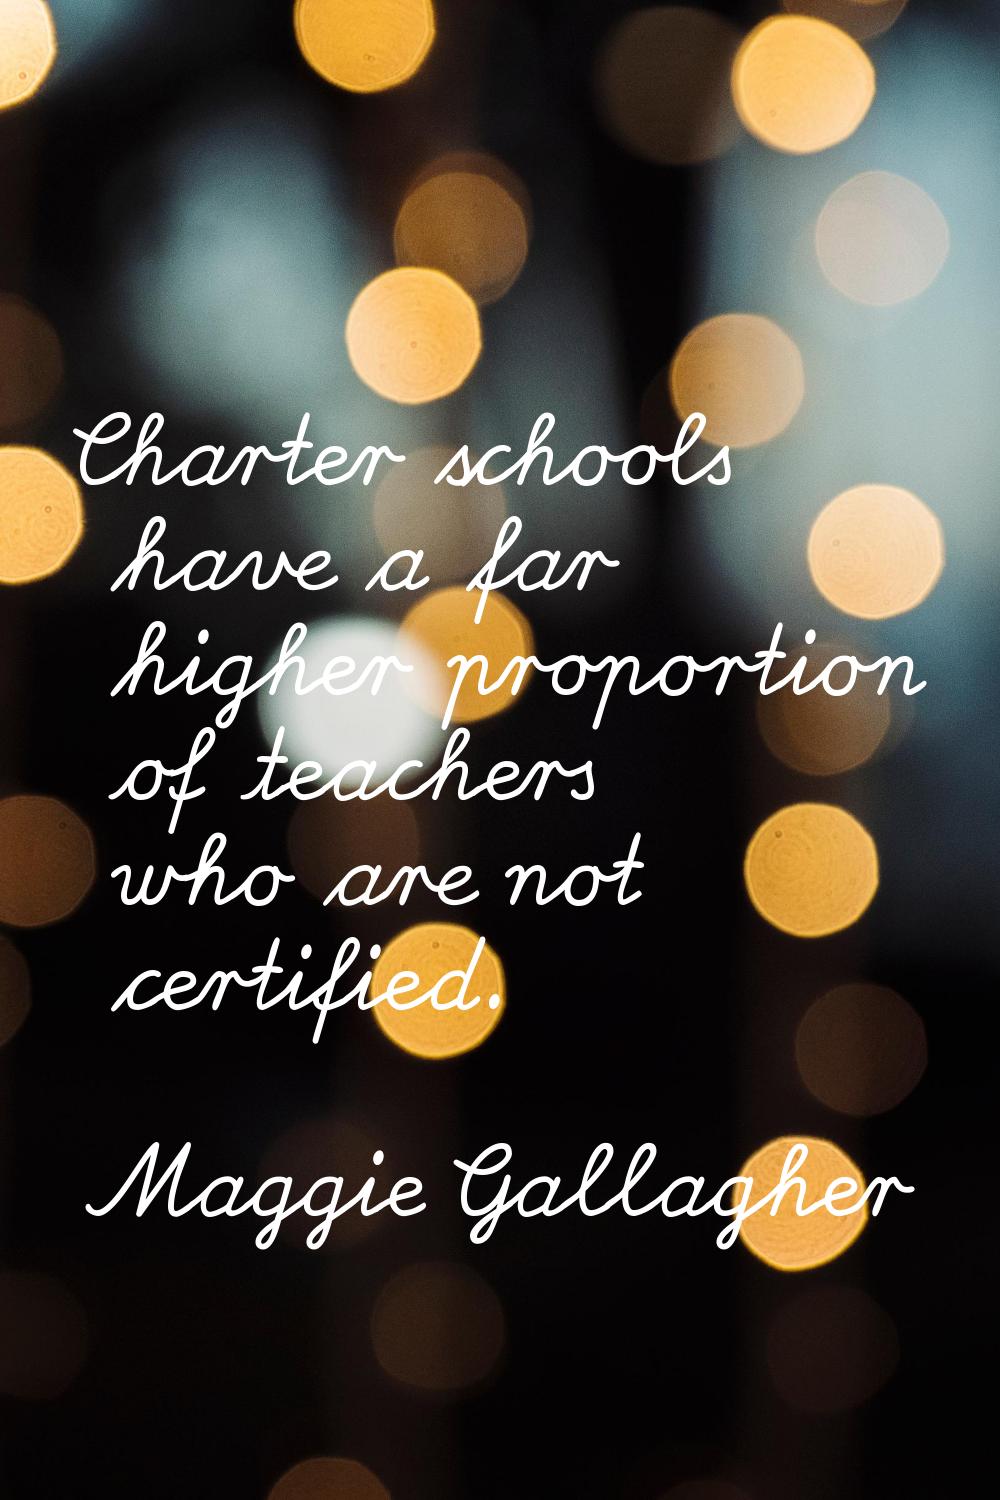 Charter schools have a far higher proportion of teachers who are not certified.